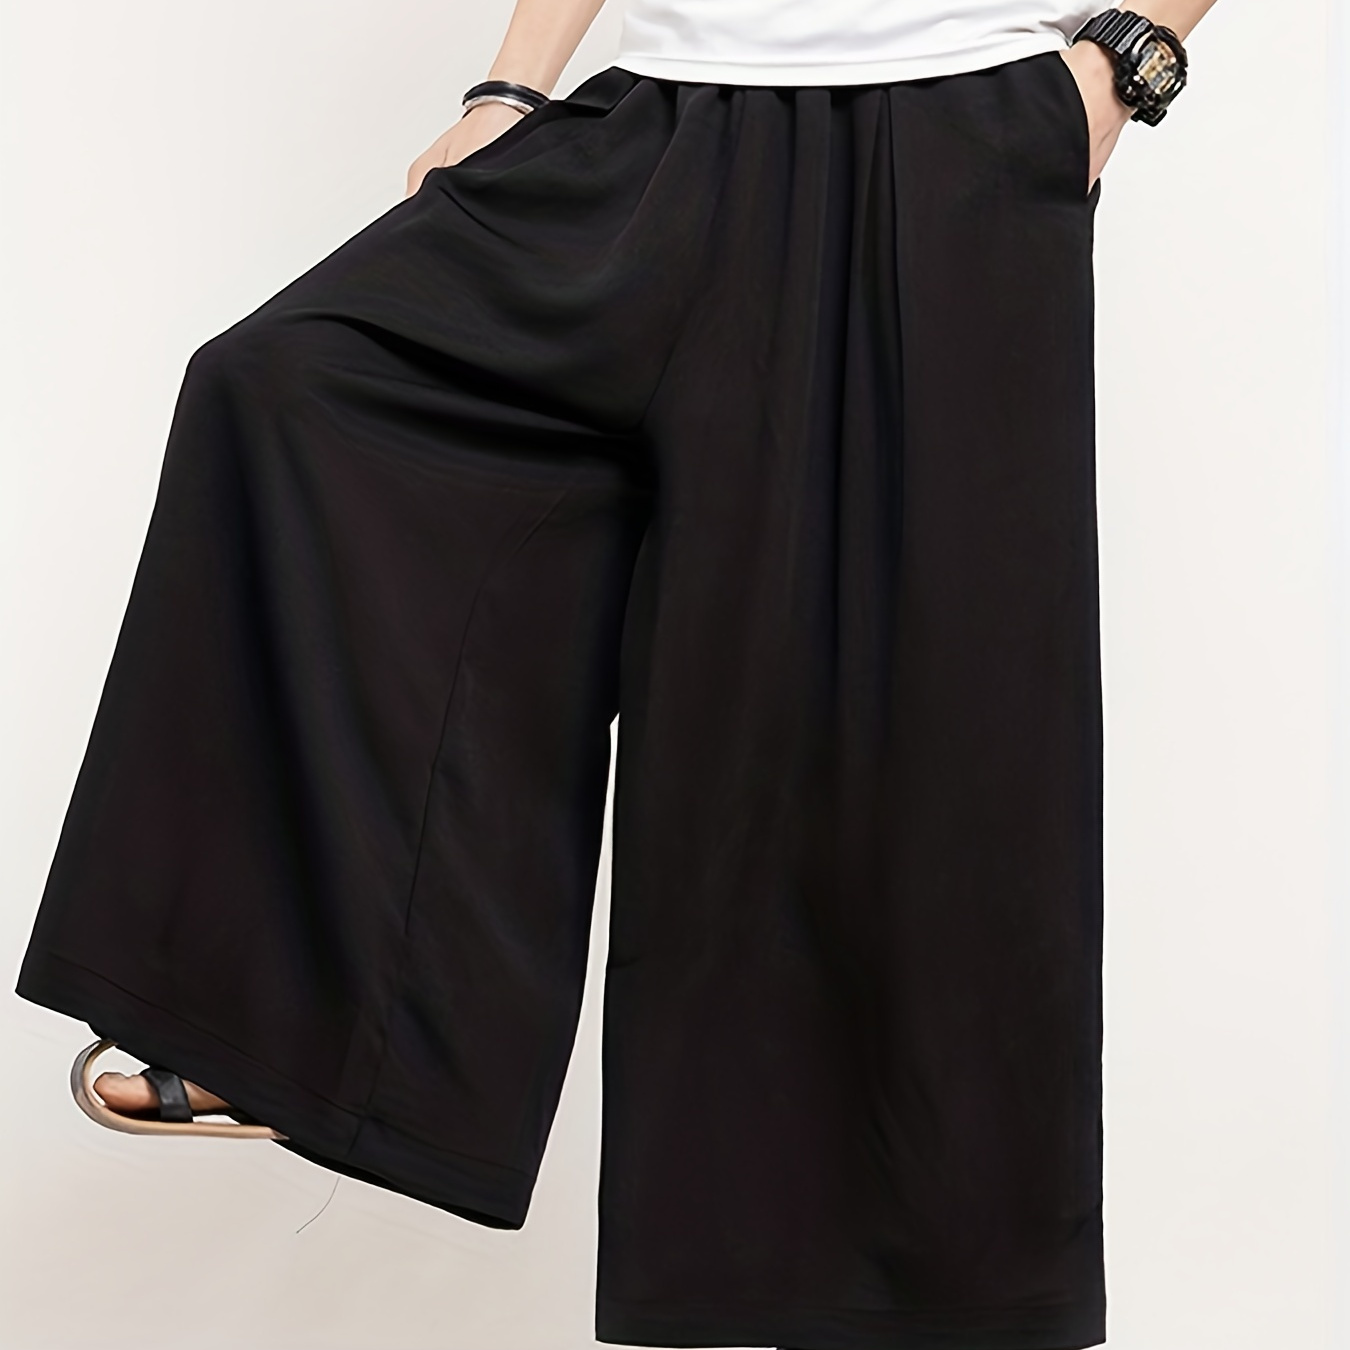 

Loose Fit Wide Leg Pants, Men's Casual Vintage Pants For Spring Fall, Culotte